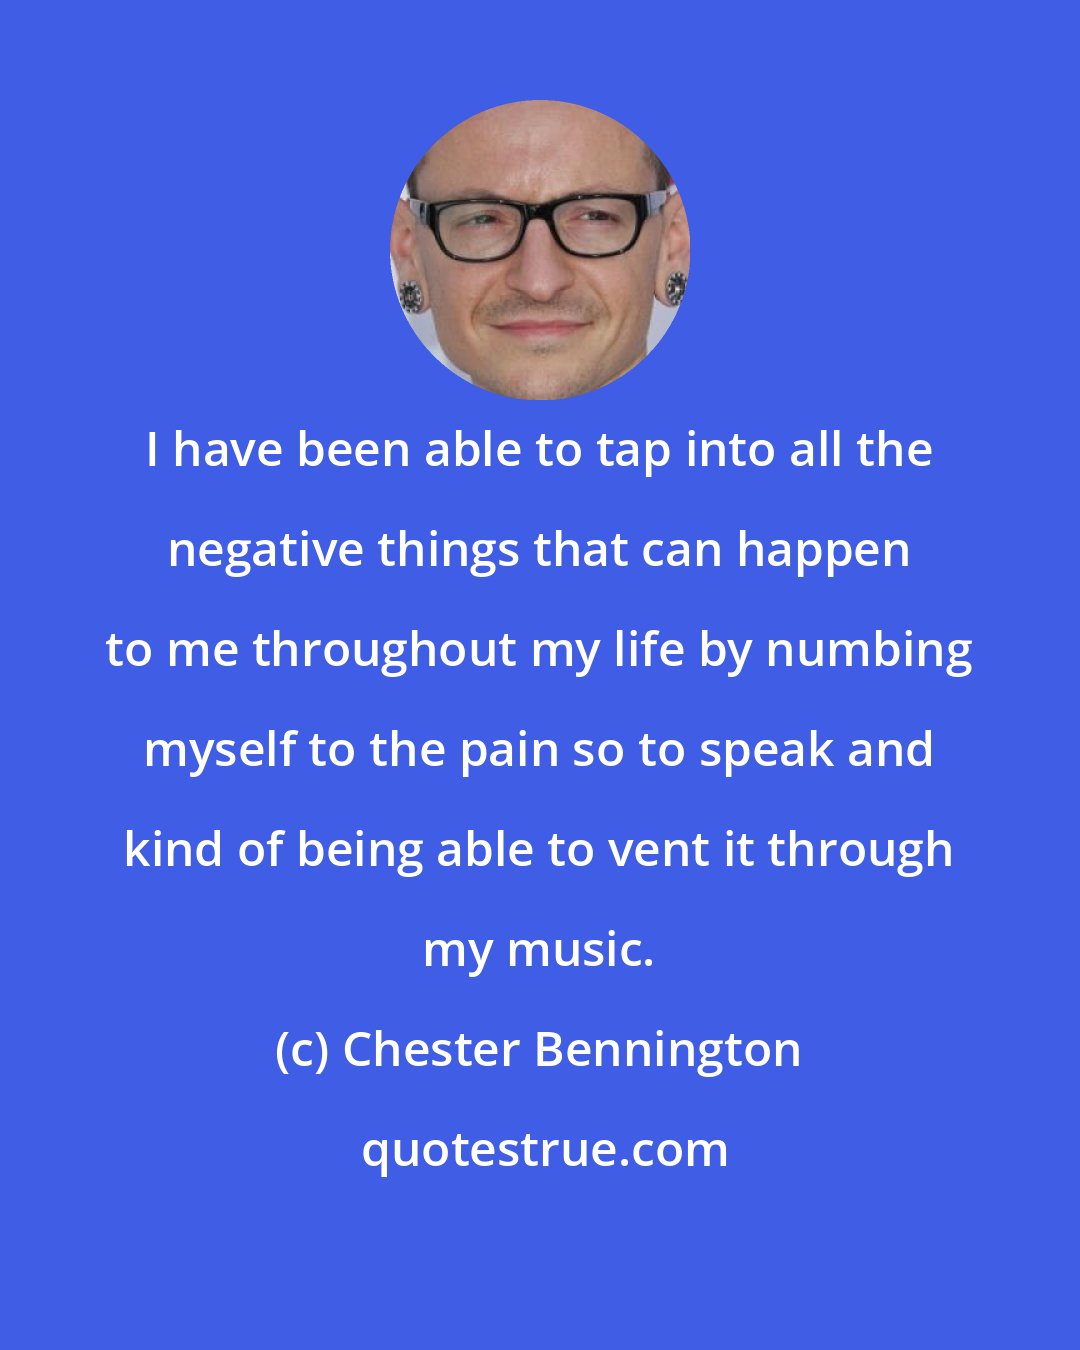 Chester Bennington: I have been able to tap into all the negative things that can happen to me throughout my life by numbing myself to the pain so to speak and kind of being able to vent it through my music.